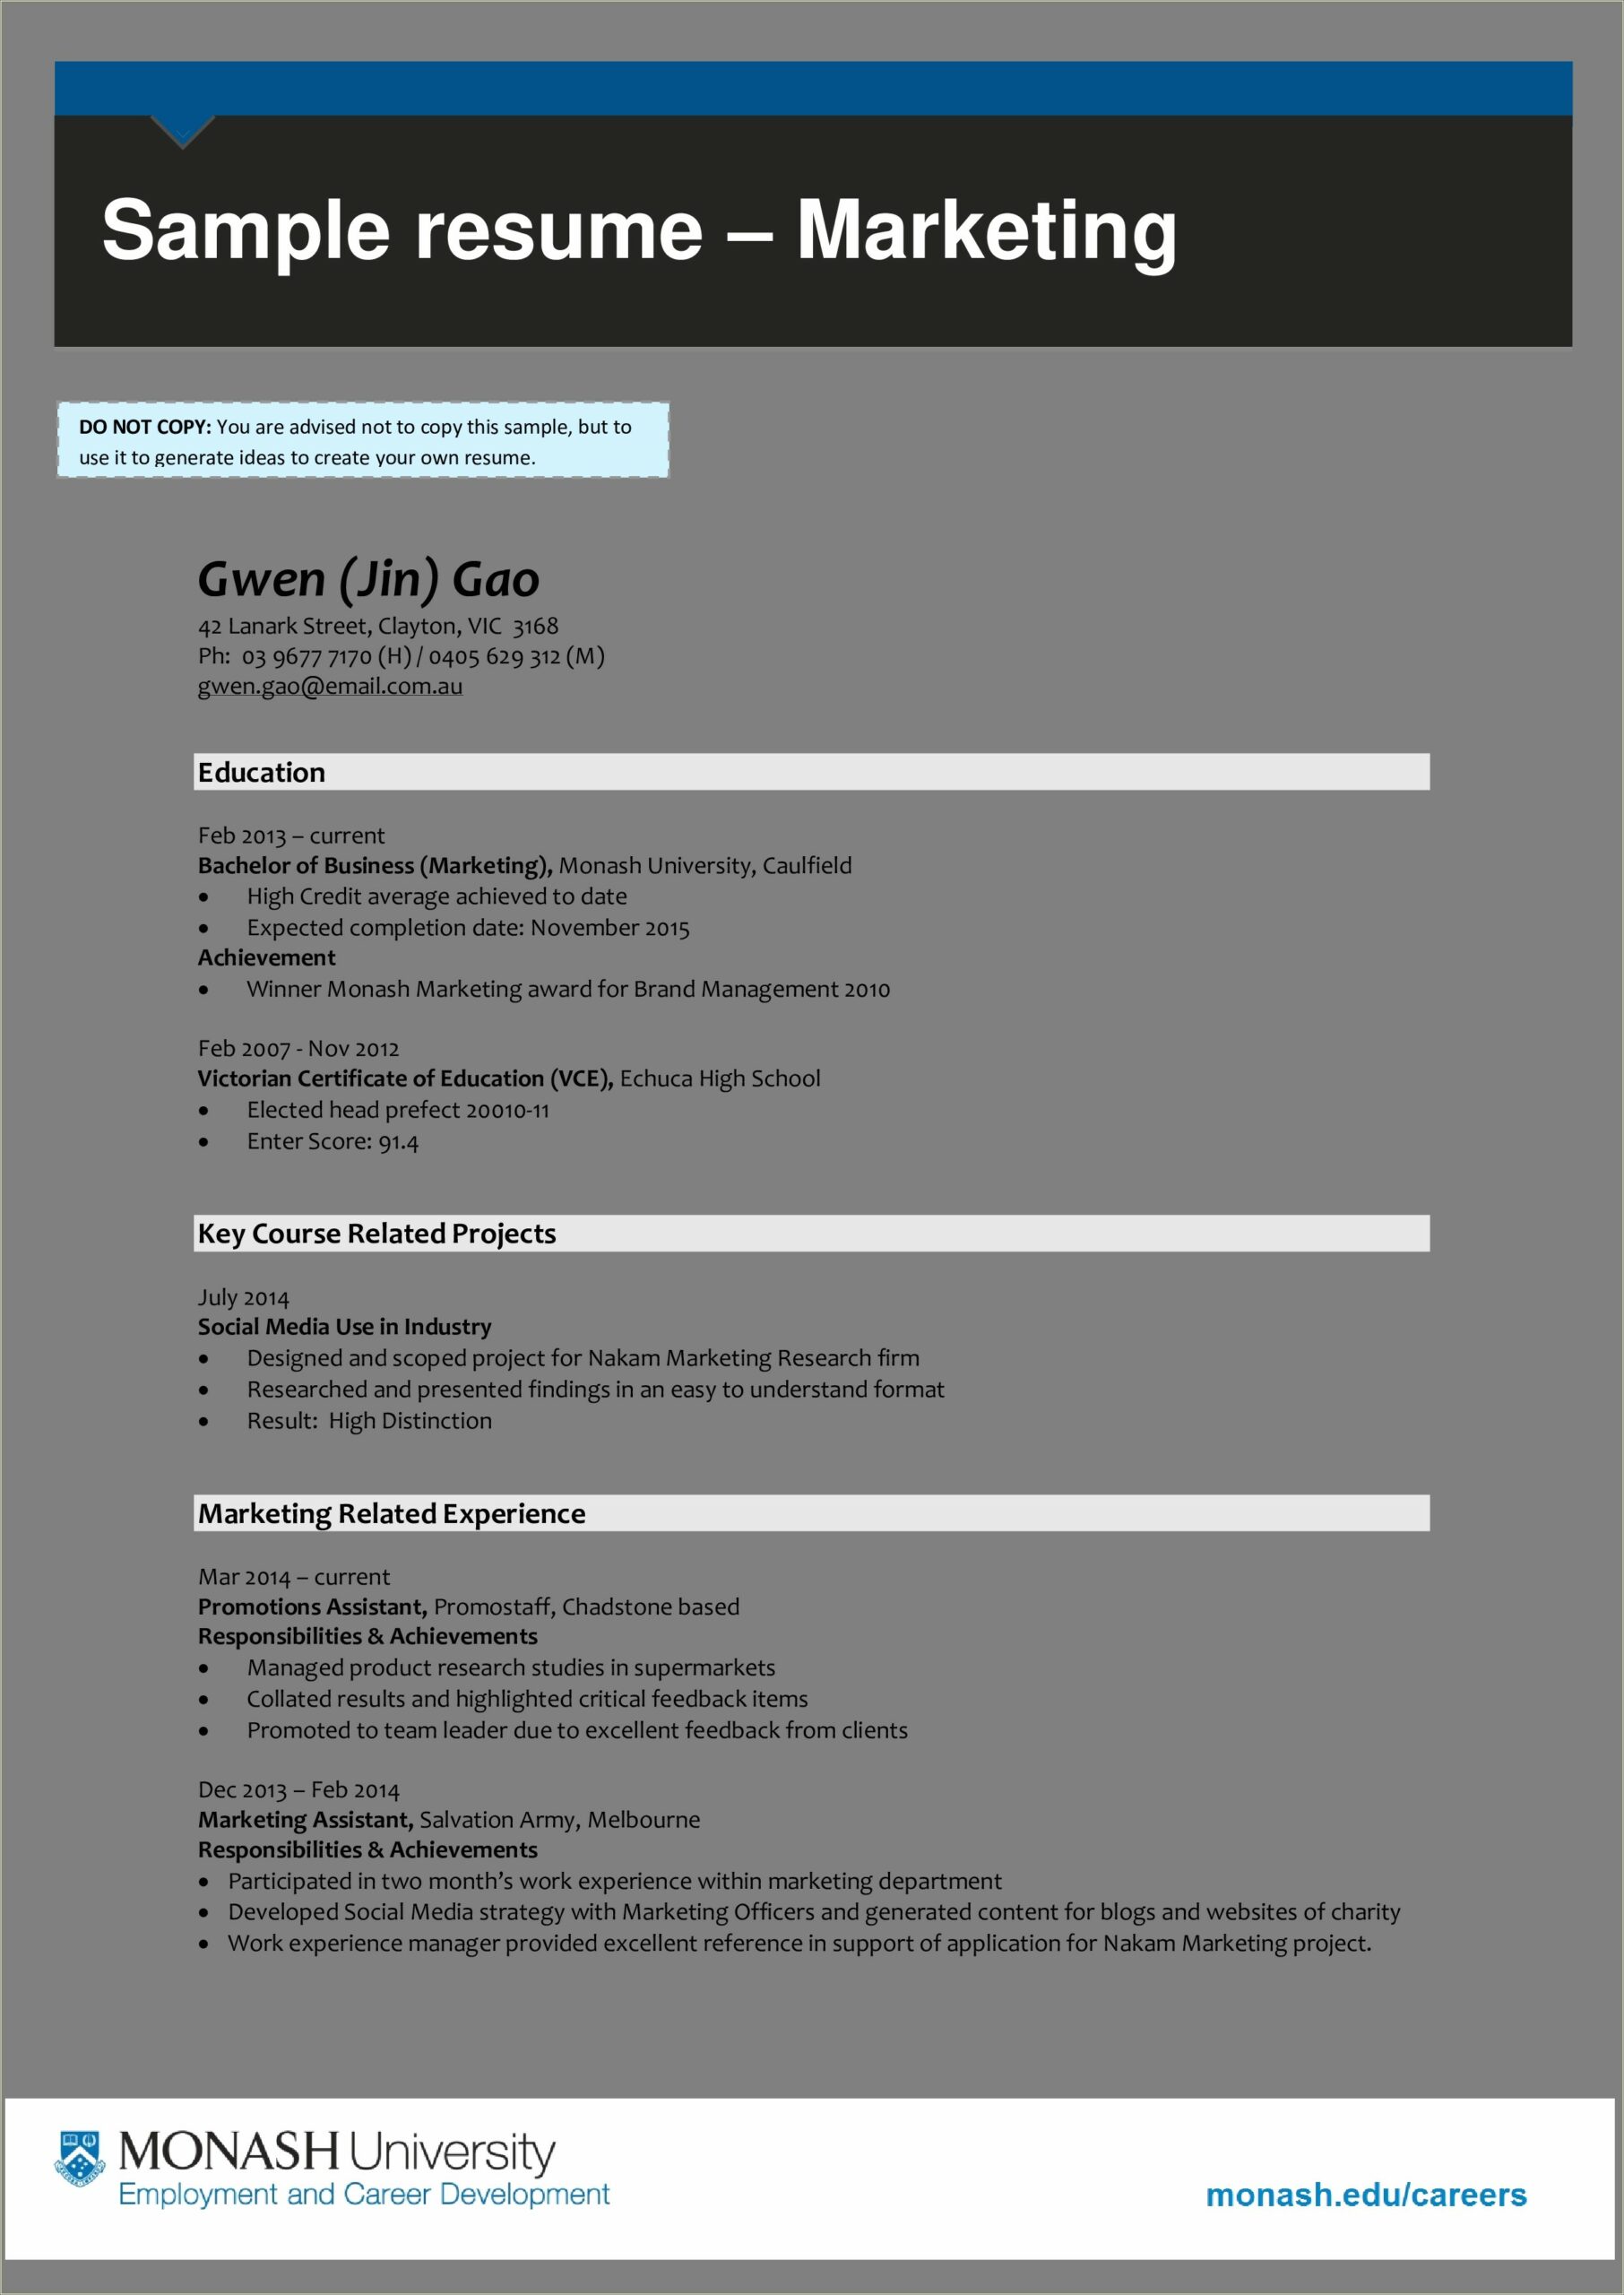 Sample Resume Achievement For Marketing Manager